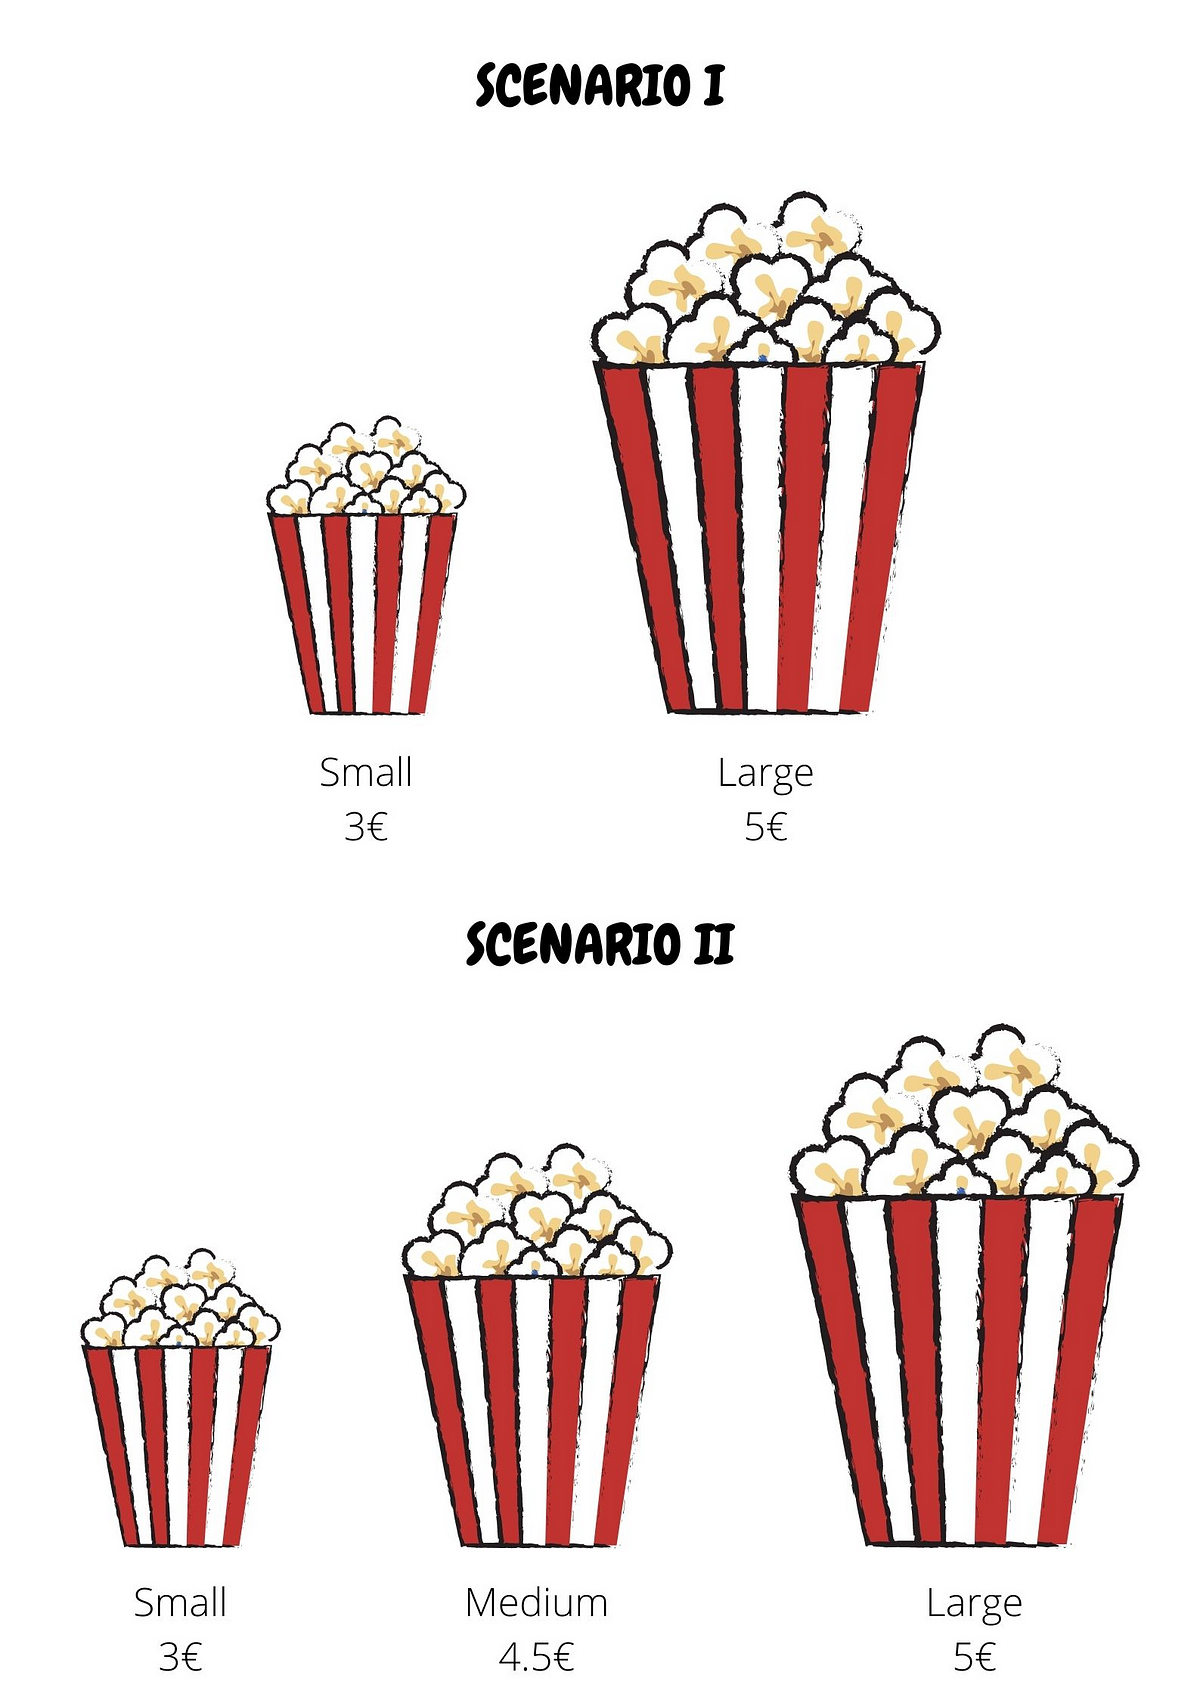 The Decoy Effect: How does the option of the medium popcorn tempt you into  buying the large one?, by Daphne Drosou